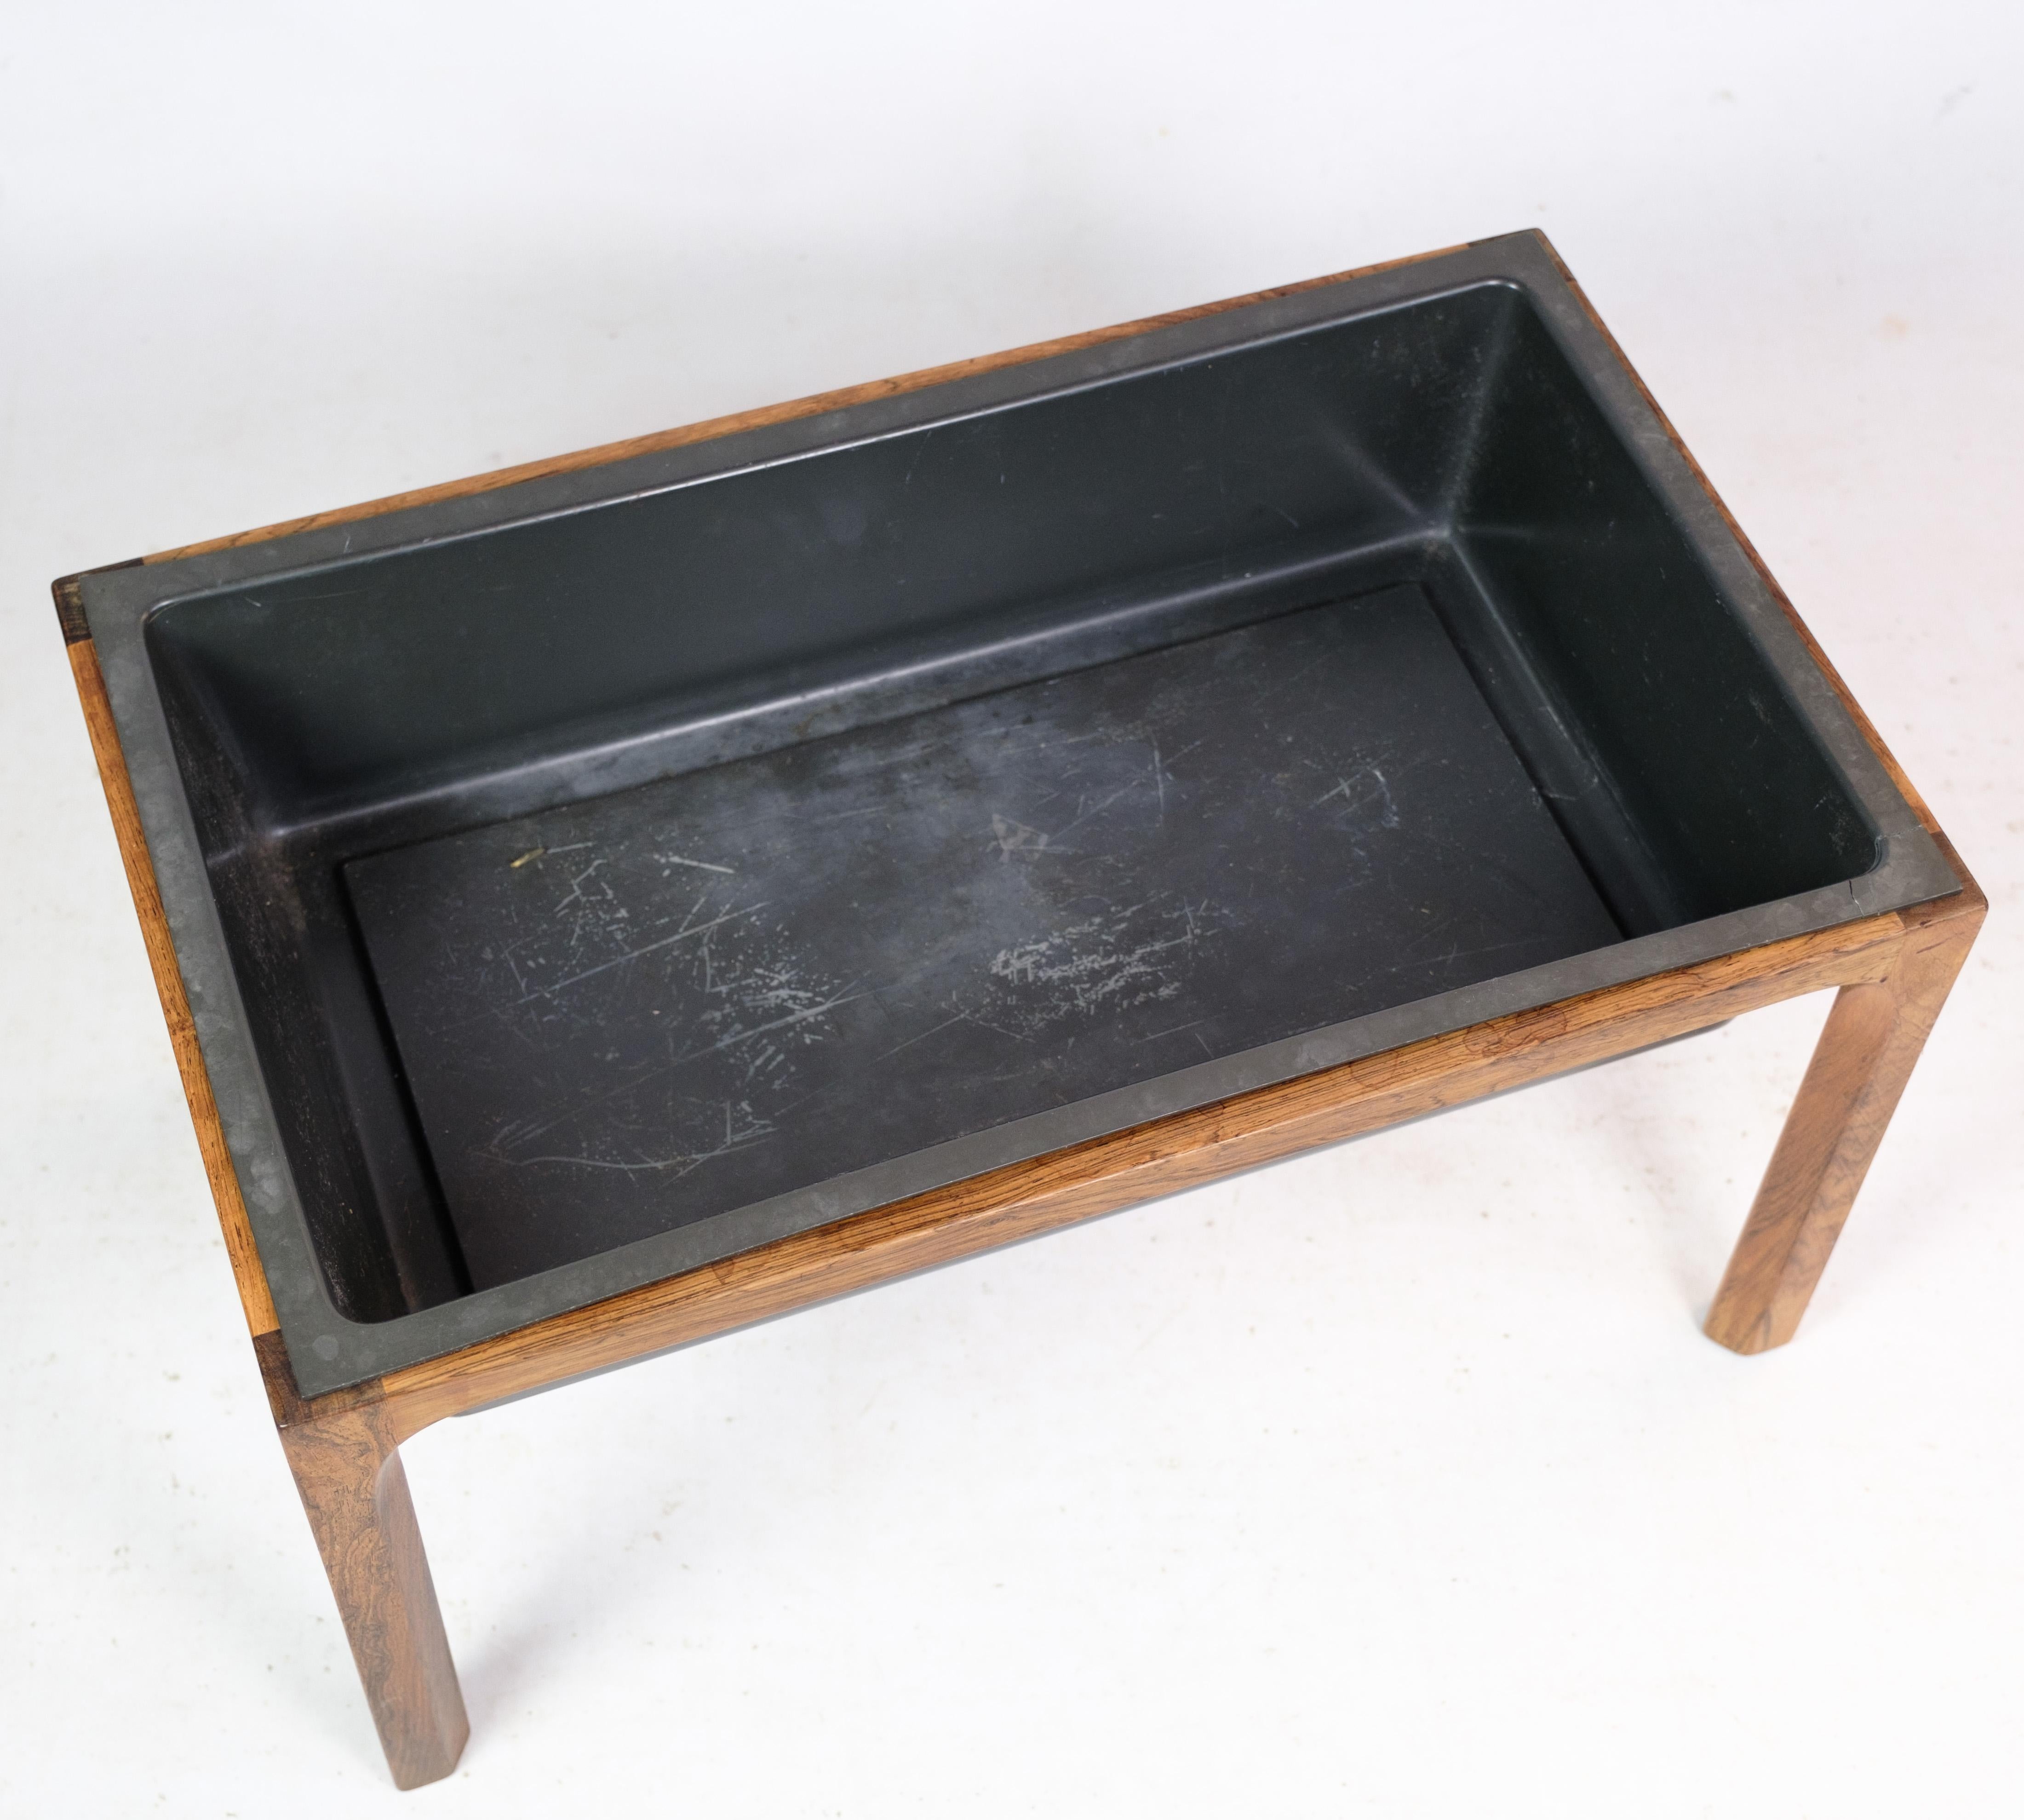 Plant box, designed by Kai Kristensen in rosewood of Danish design from around the 1960s.

This product will be inspected thoroughly at our professional workshop by our educated employees, who assure the product quality.